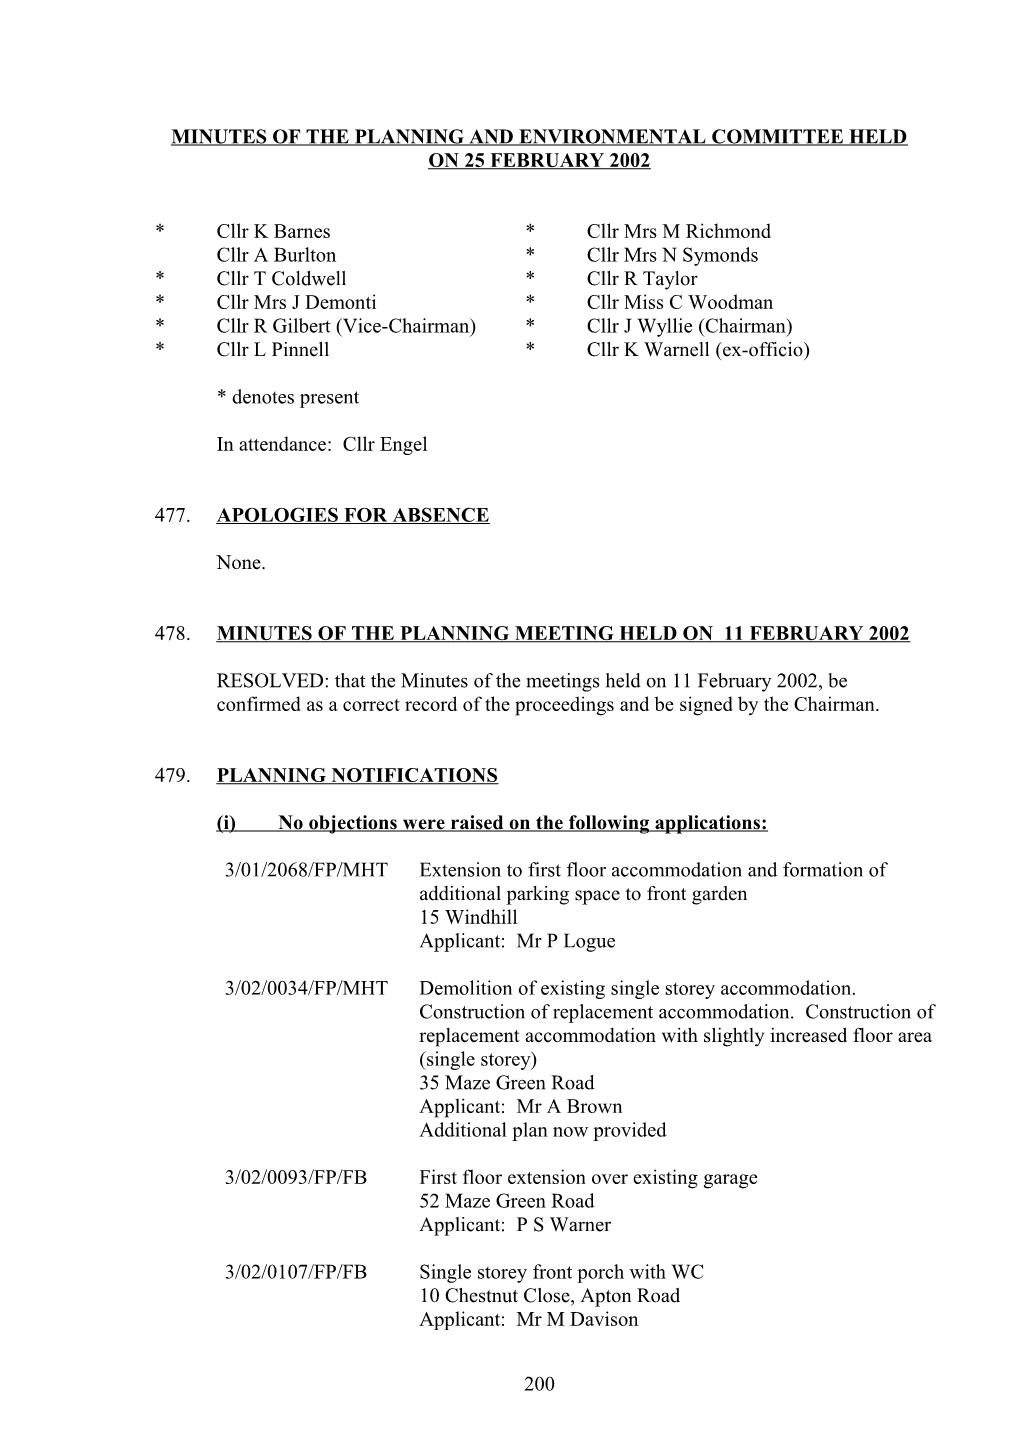 Minutes of the Planning and Environmental Committee Held on 8 October 2001